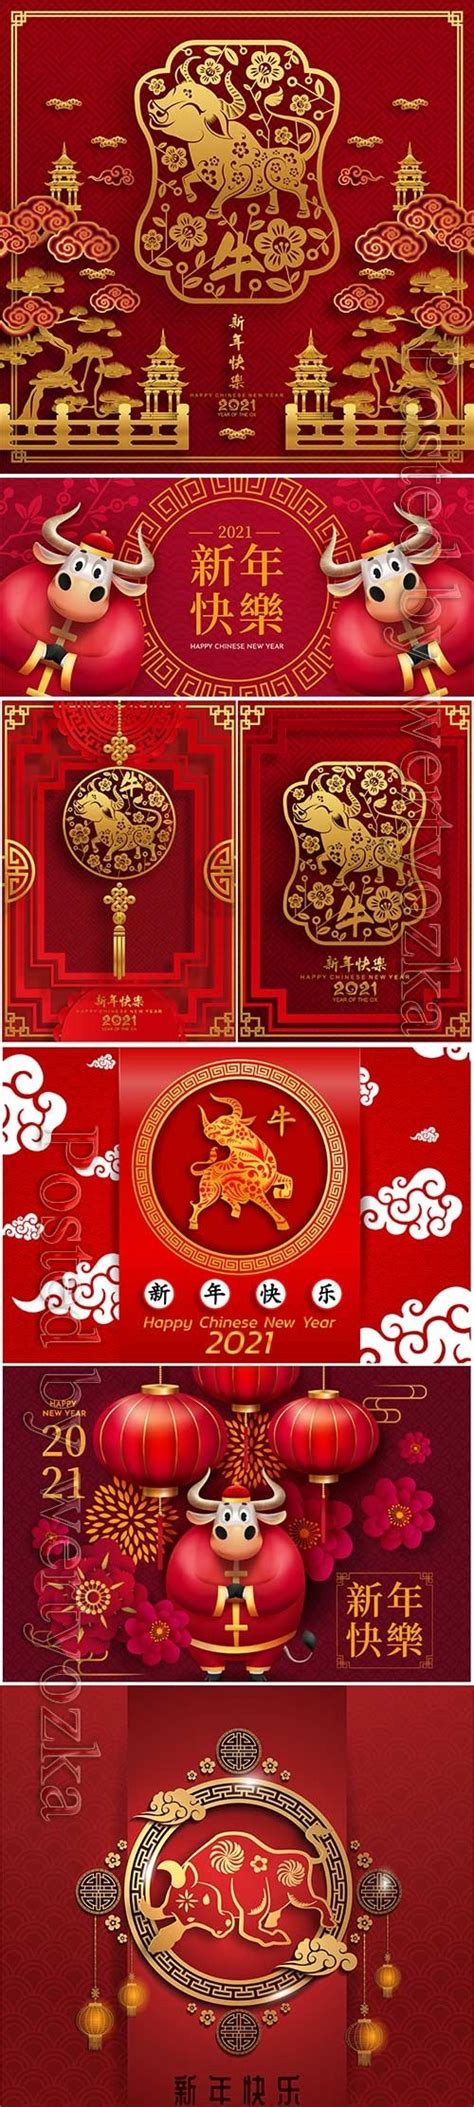 Get happy new year message 2021 which are the best of all time to wish your family,friends & loved ones. Download Happy chinese new year 2021 vector | DesireFX.COM